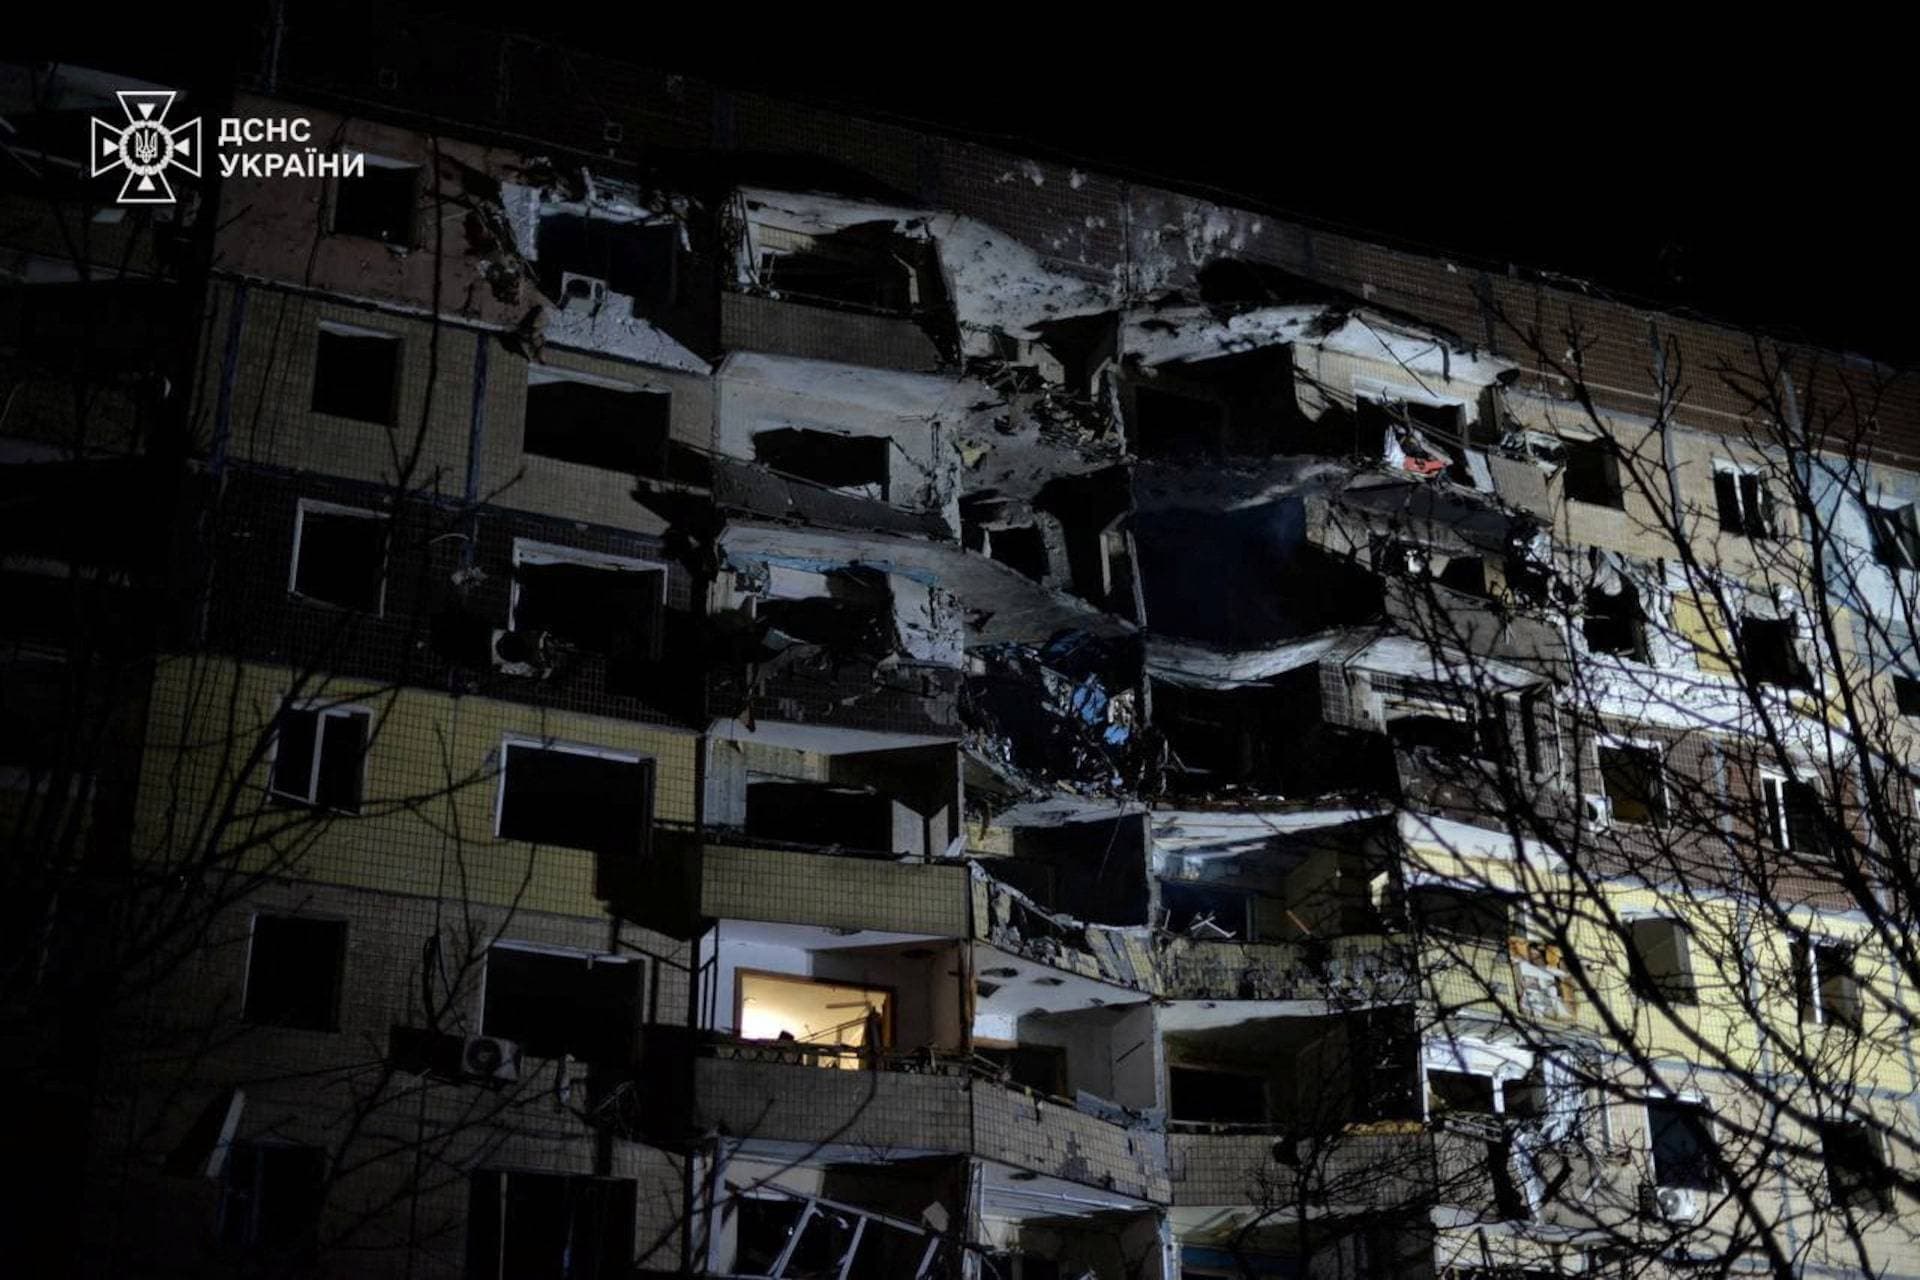 View of the damage on a building after a Russian missile slammed into two apartment buildings in Kryvyi Rih